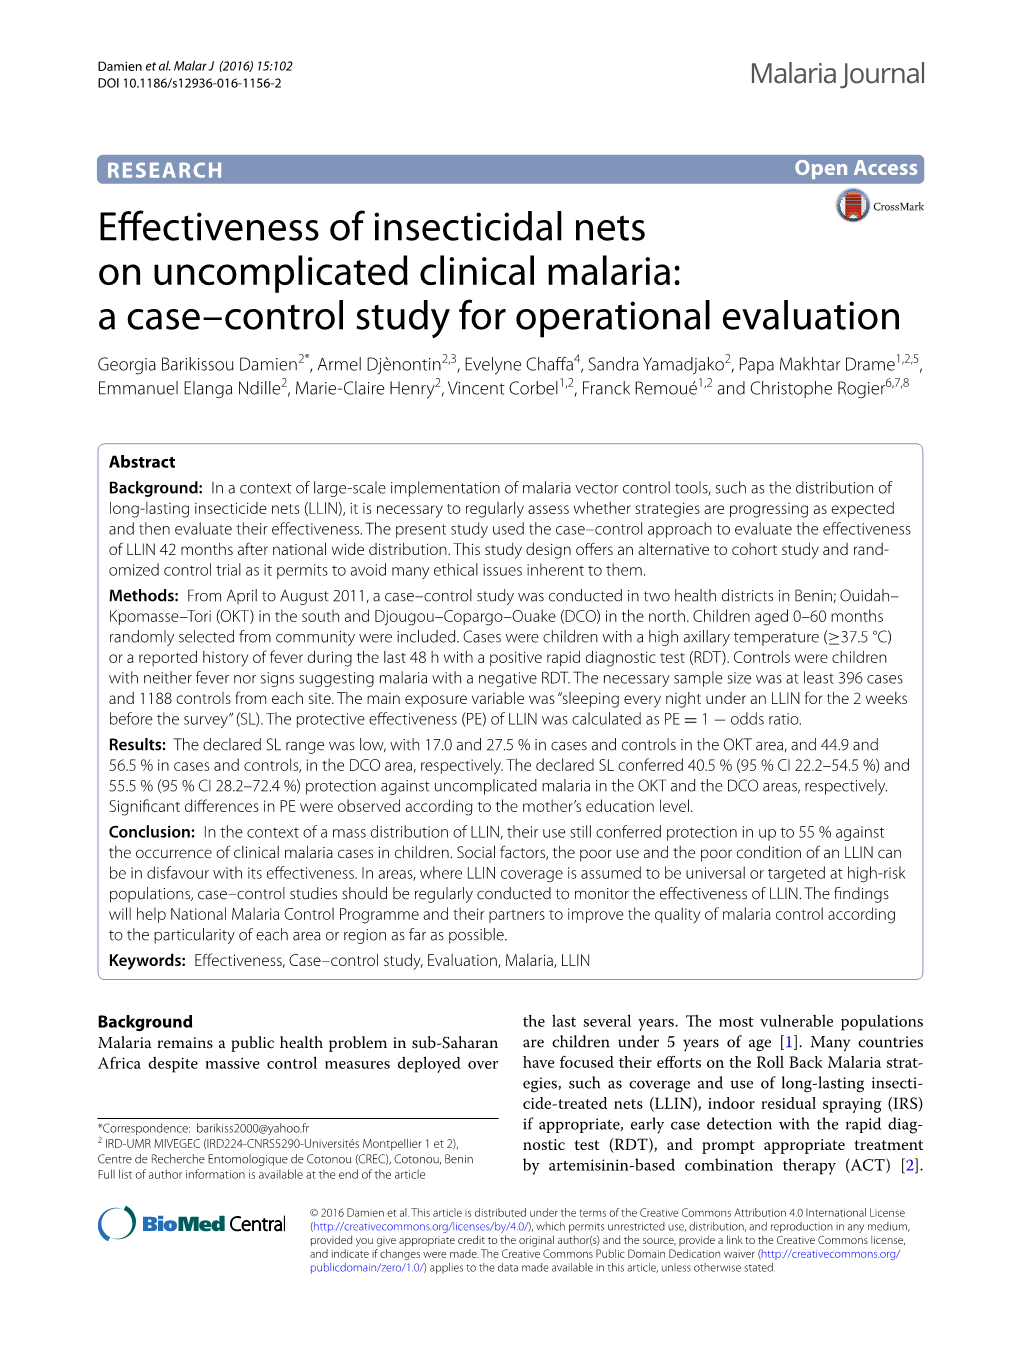 Effectiveness of Insecticidal Nets on Uncomplicated